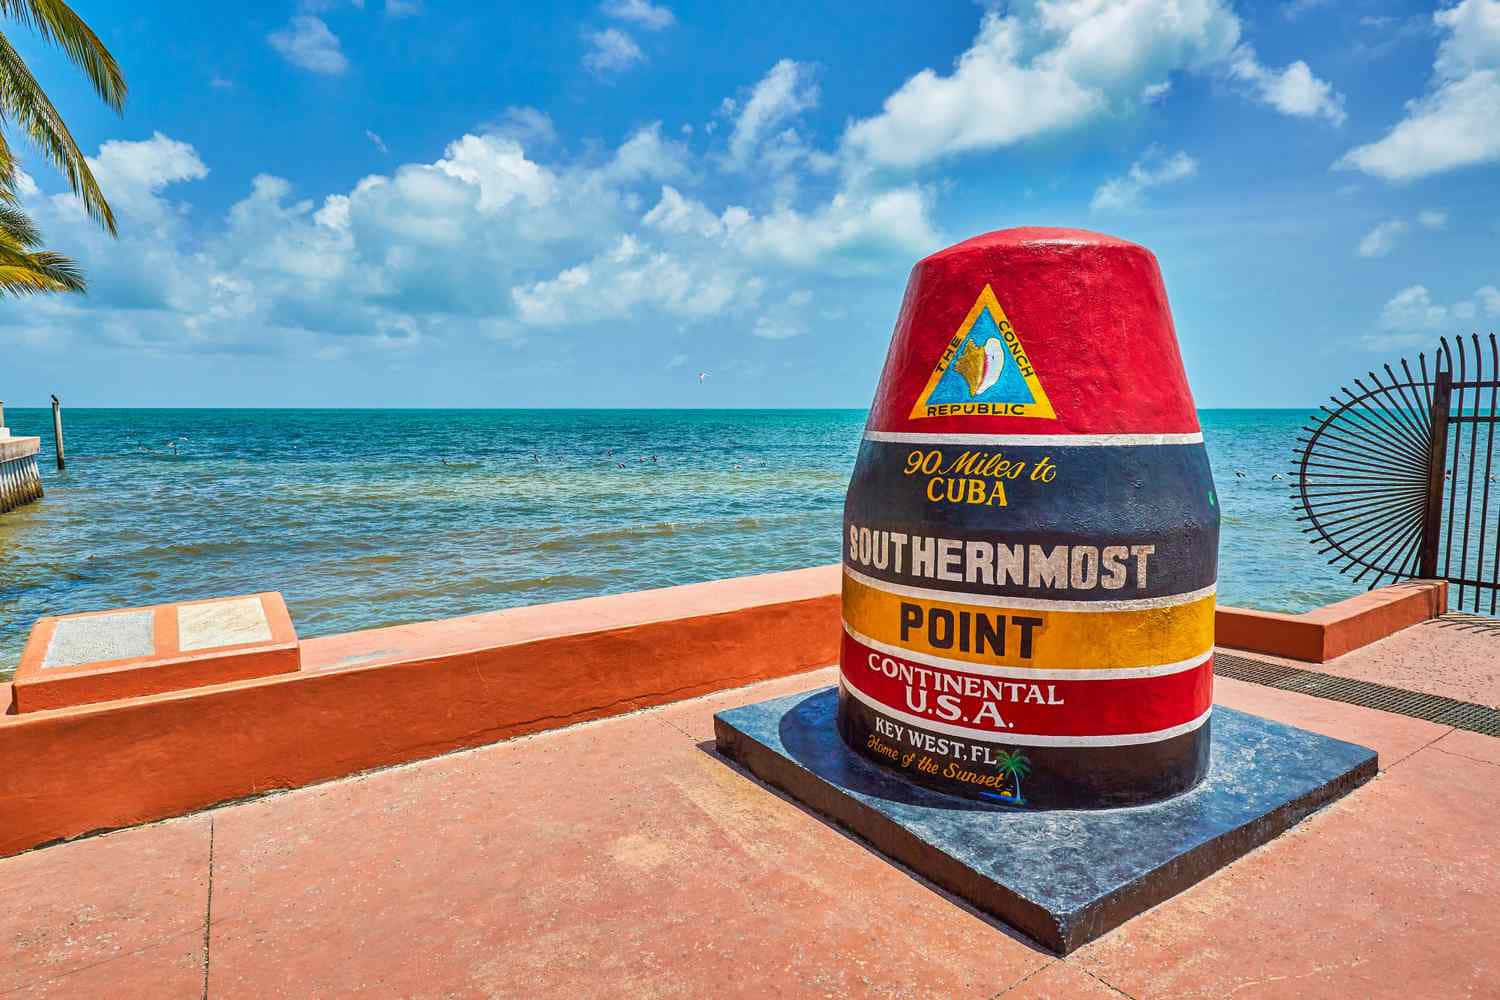 A Colorful Monument Is In Front Of The Ocean